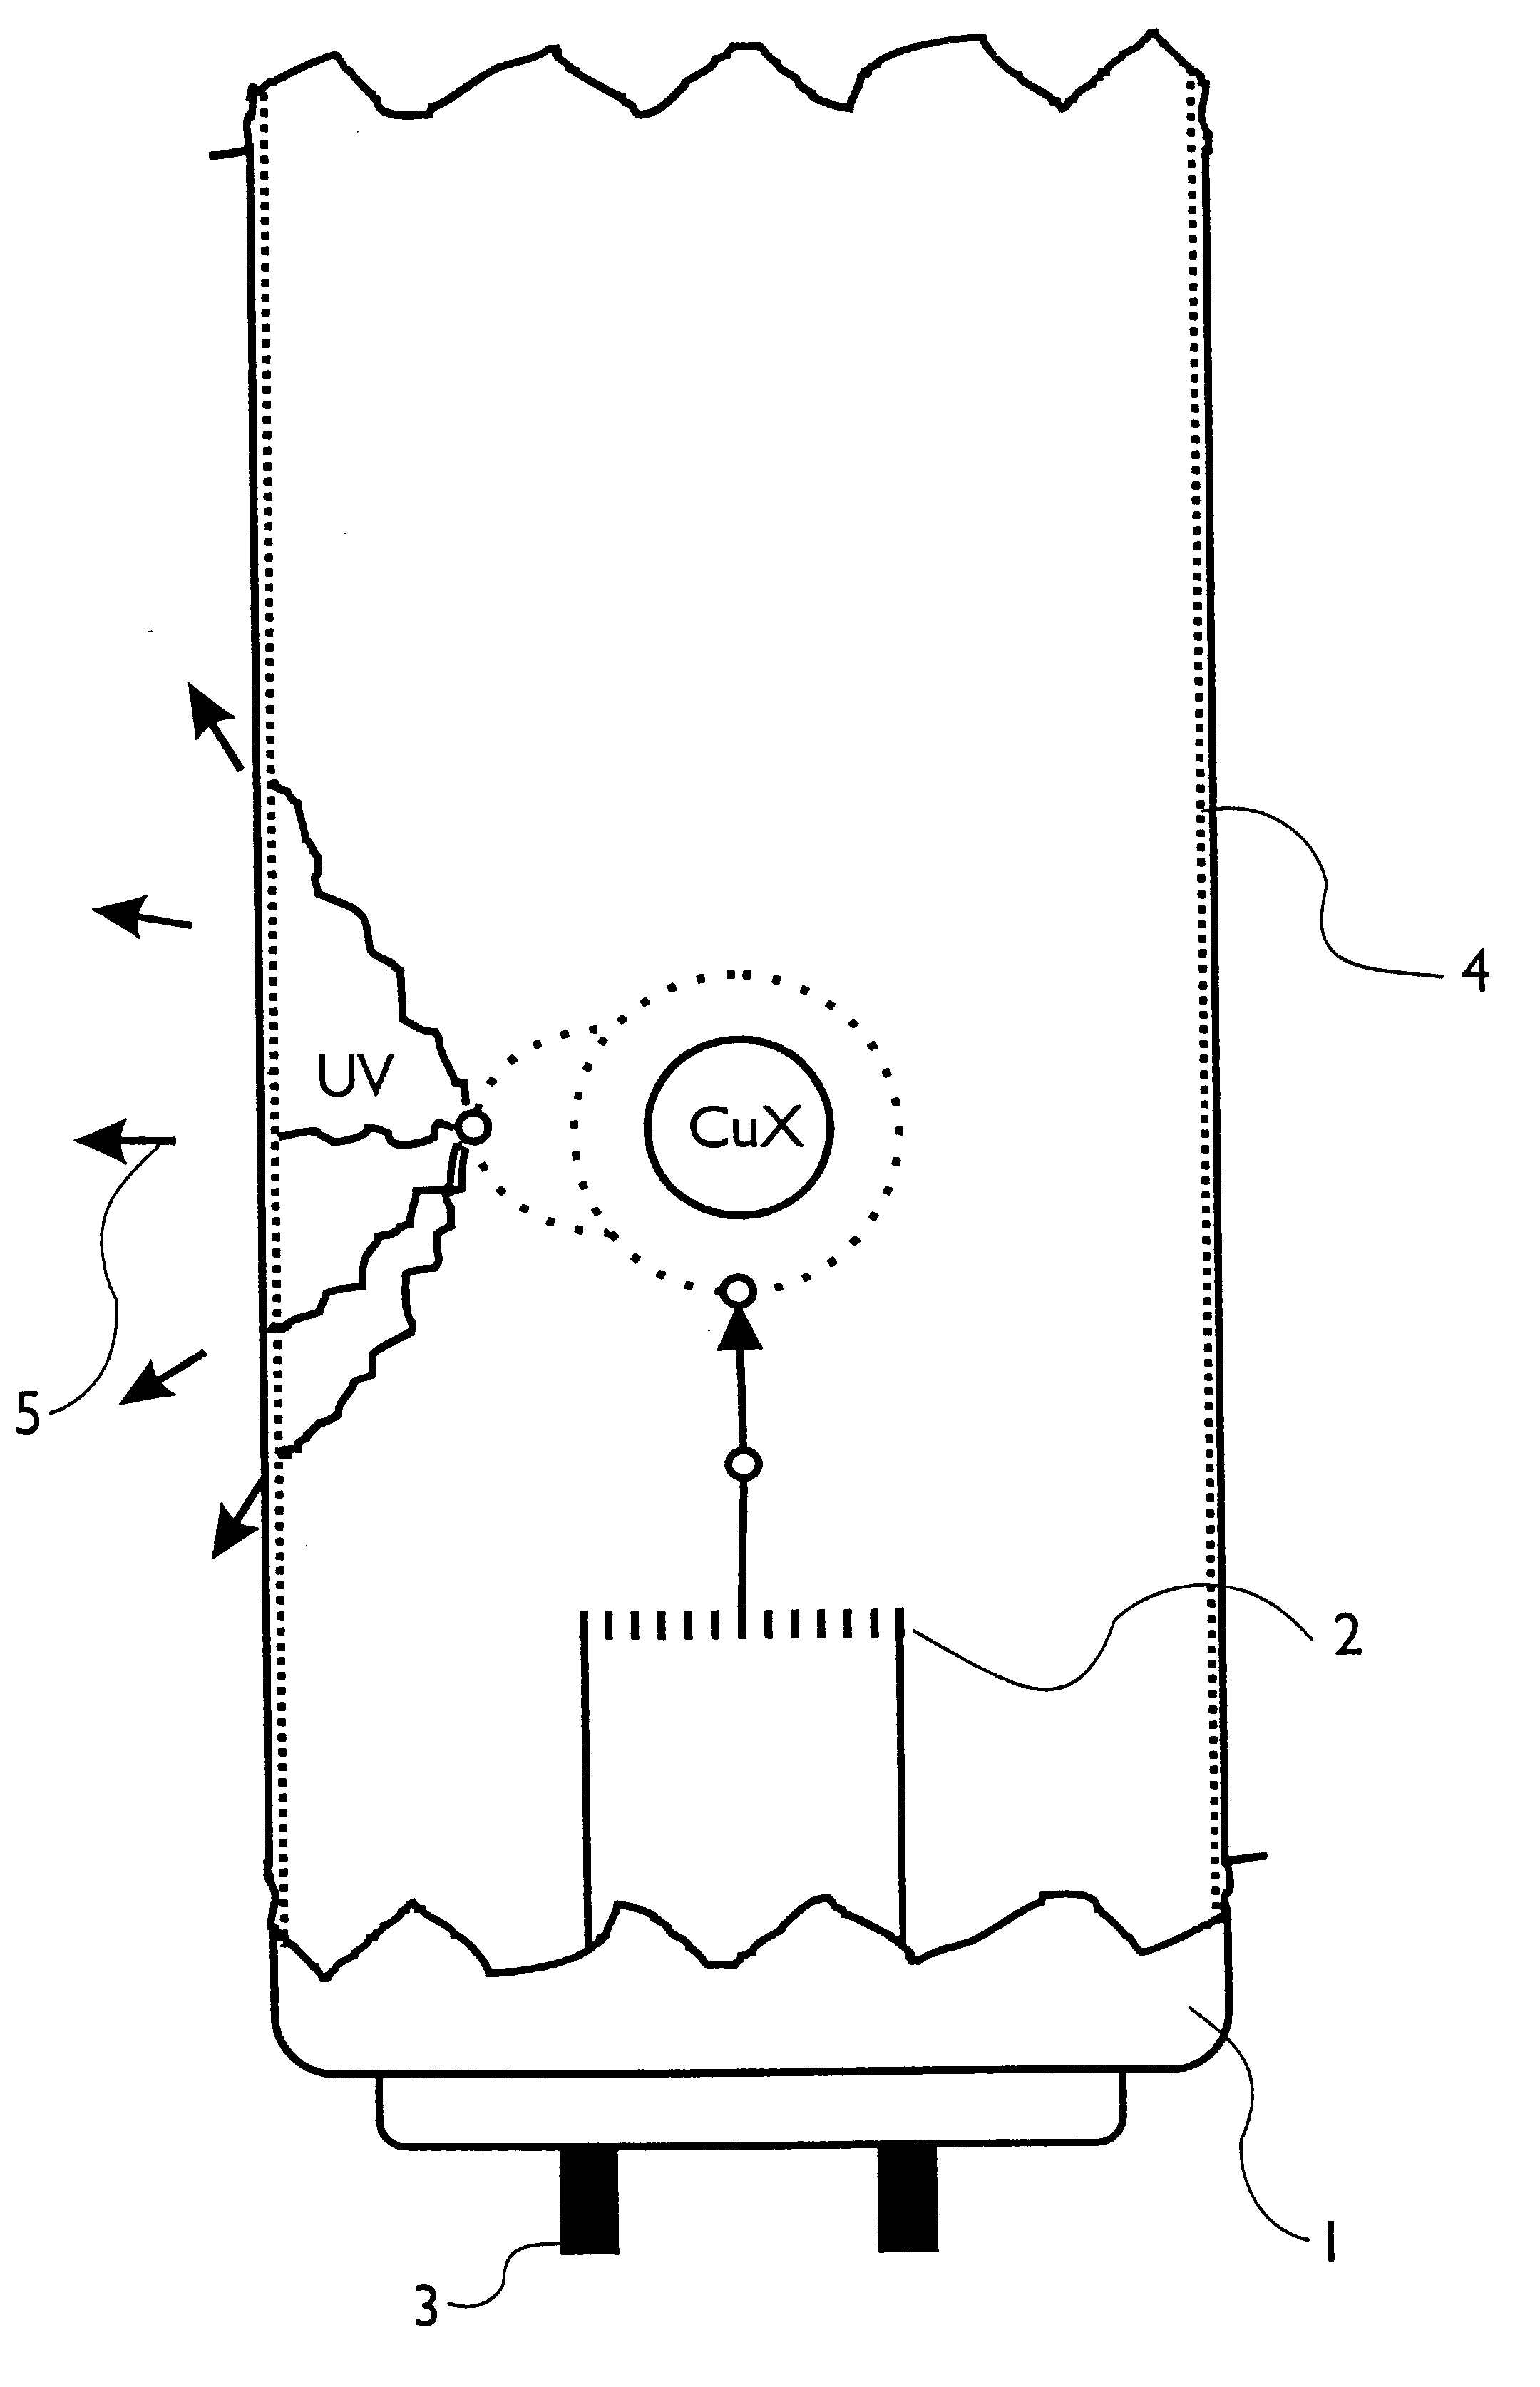 Low-pressure gas discharge lamp with a copper-containing gas filling